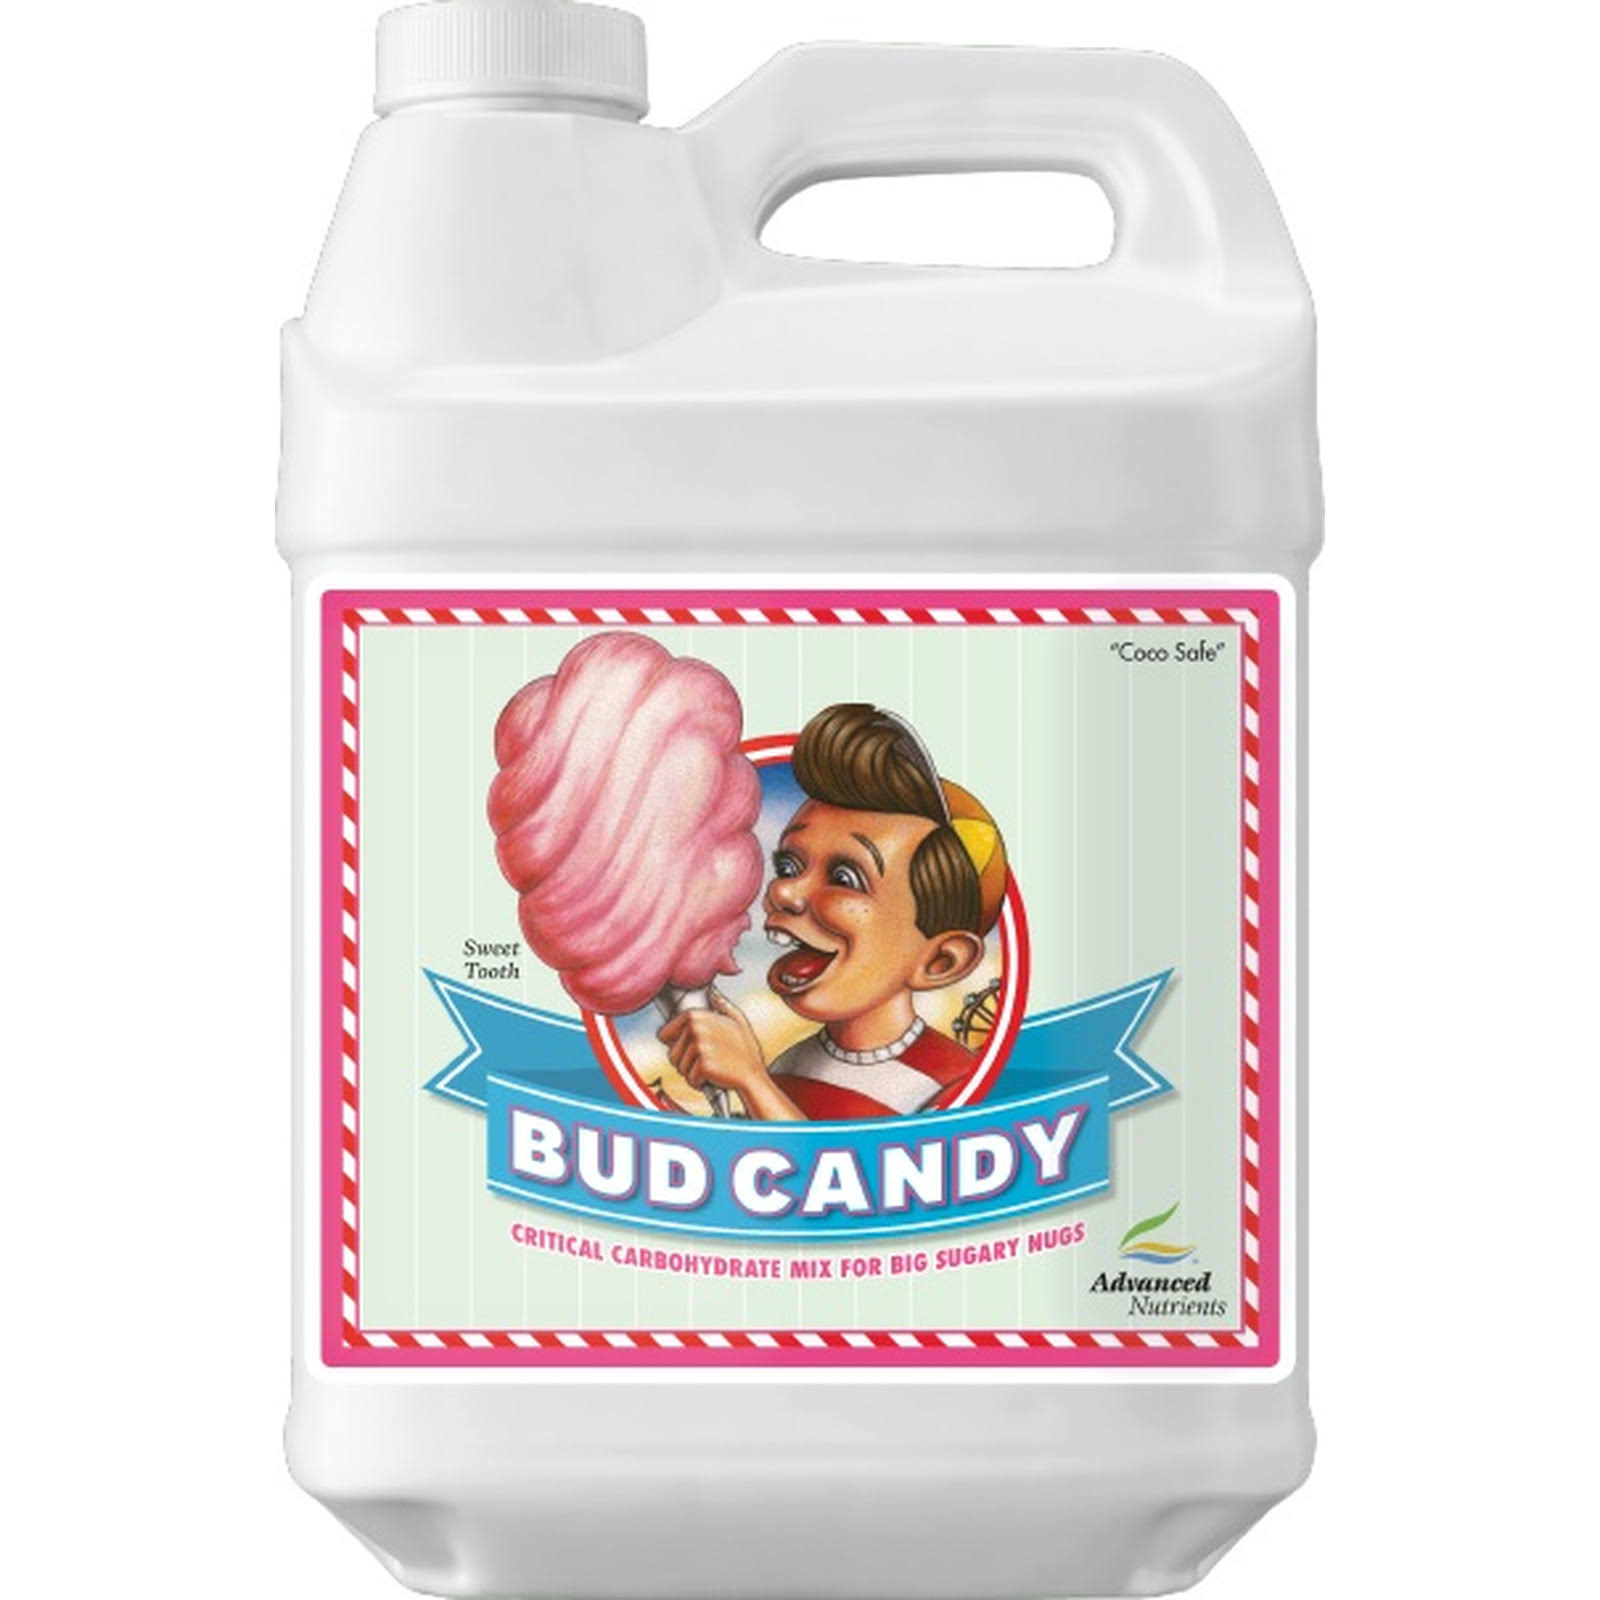 Advanced Nutrients Bud Candy Flower Booster - 500ml